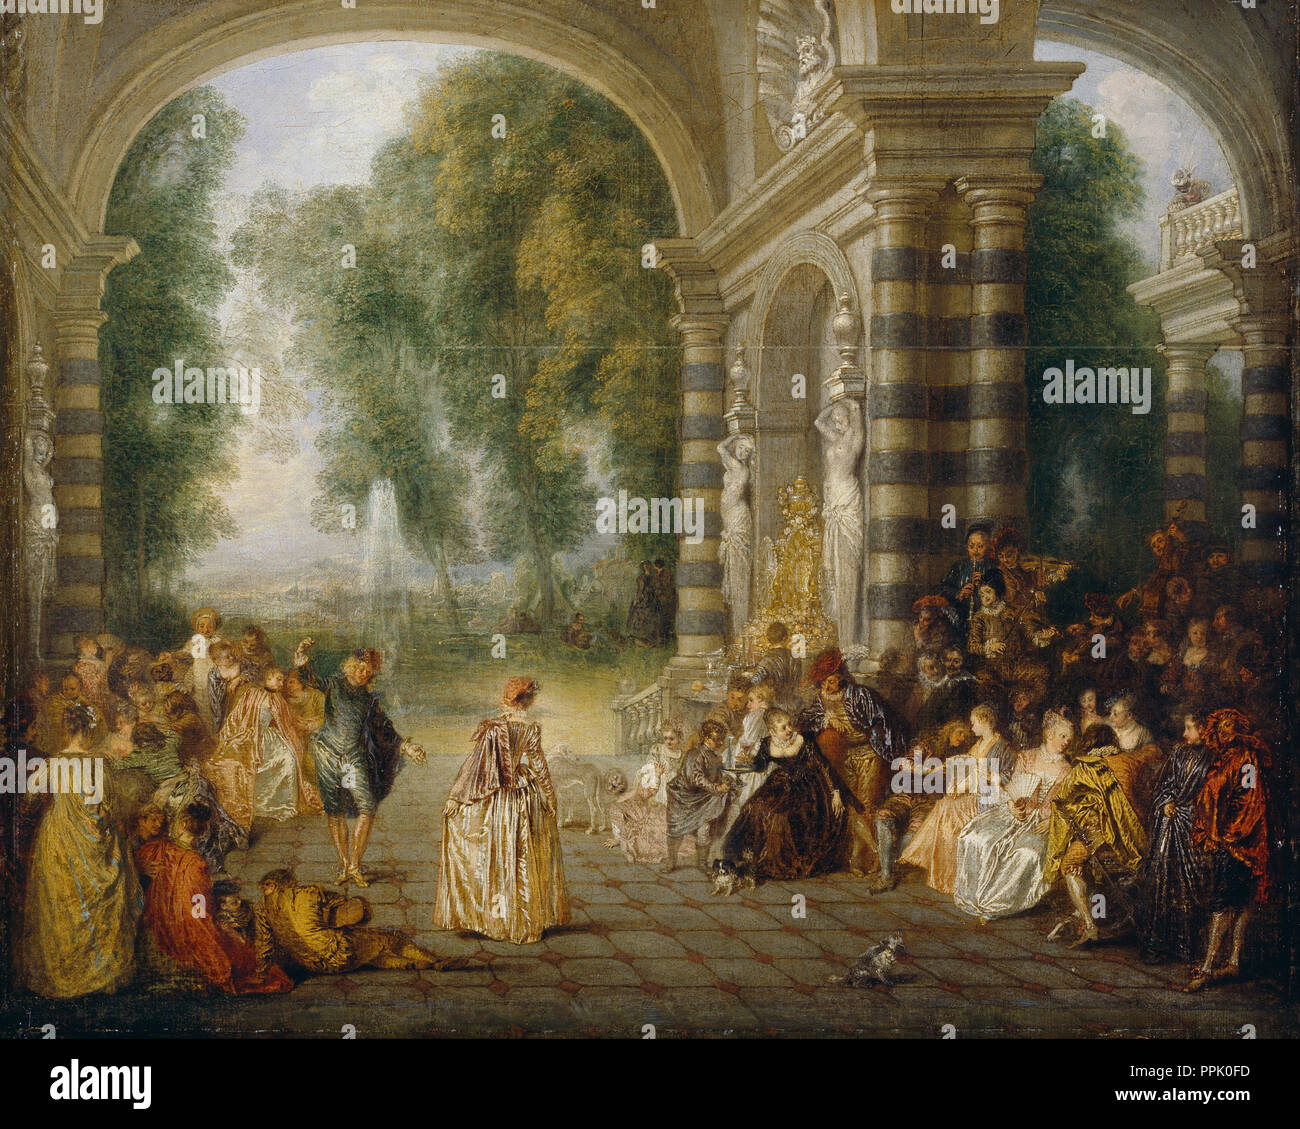 Les Plaisirs du Bal. Date/Period: Ca. 1715-17. Painting. Oil on canvas Oil. Height: 525 mm (20.66 in); Width: 652 mm (25.66 in). Author: WATTEAU, ANTOINE. ANTOINE WATTEAU. Stock Photo